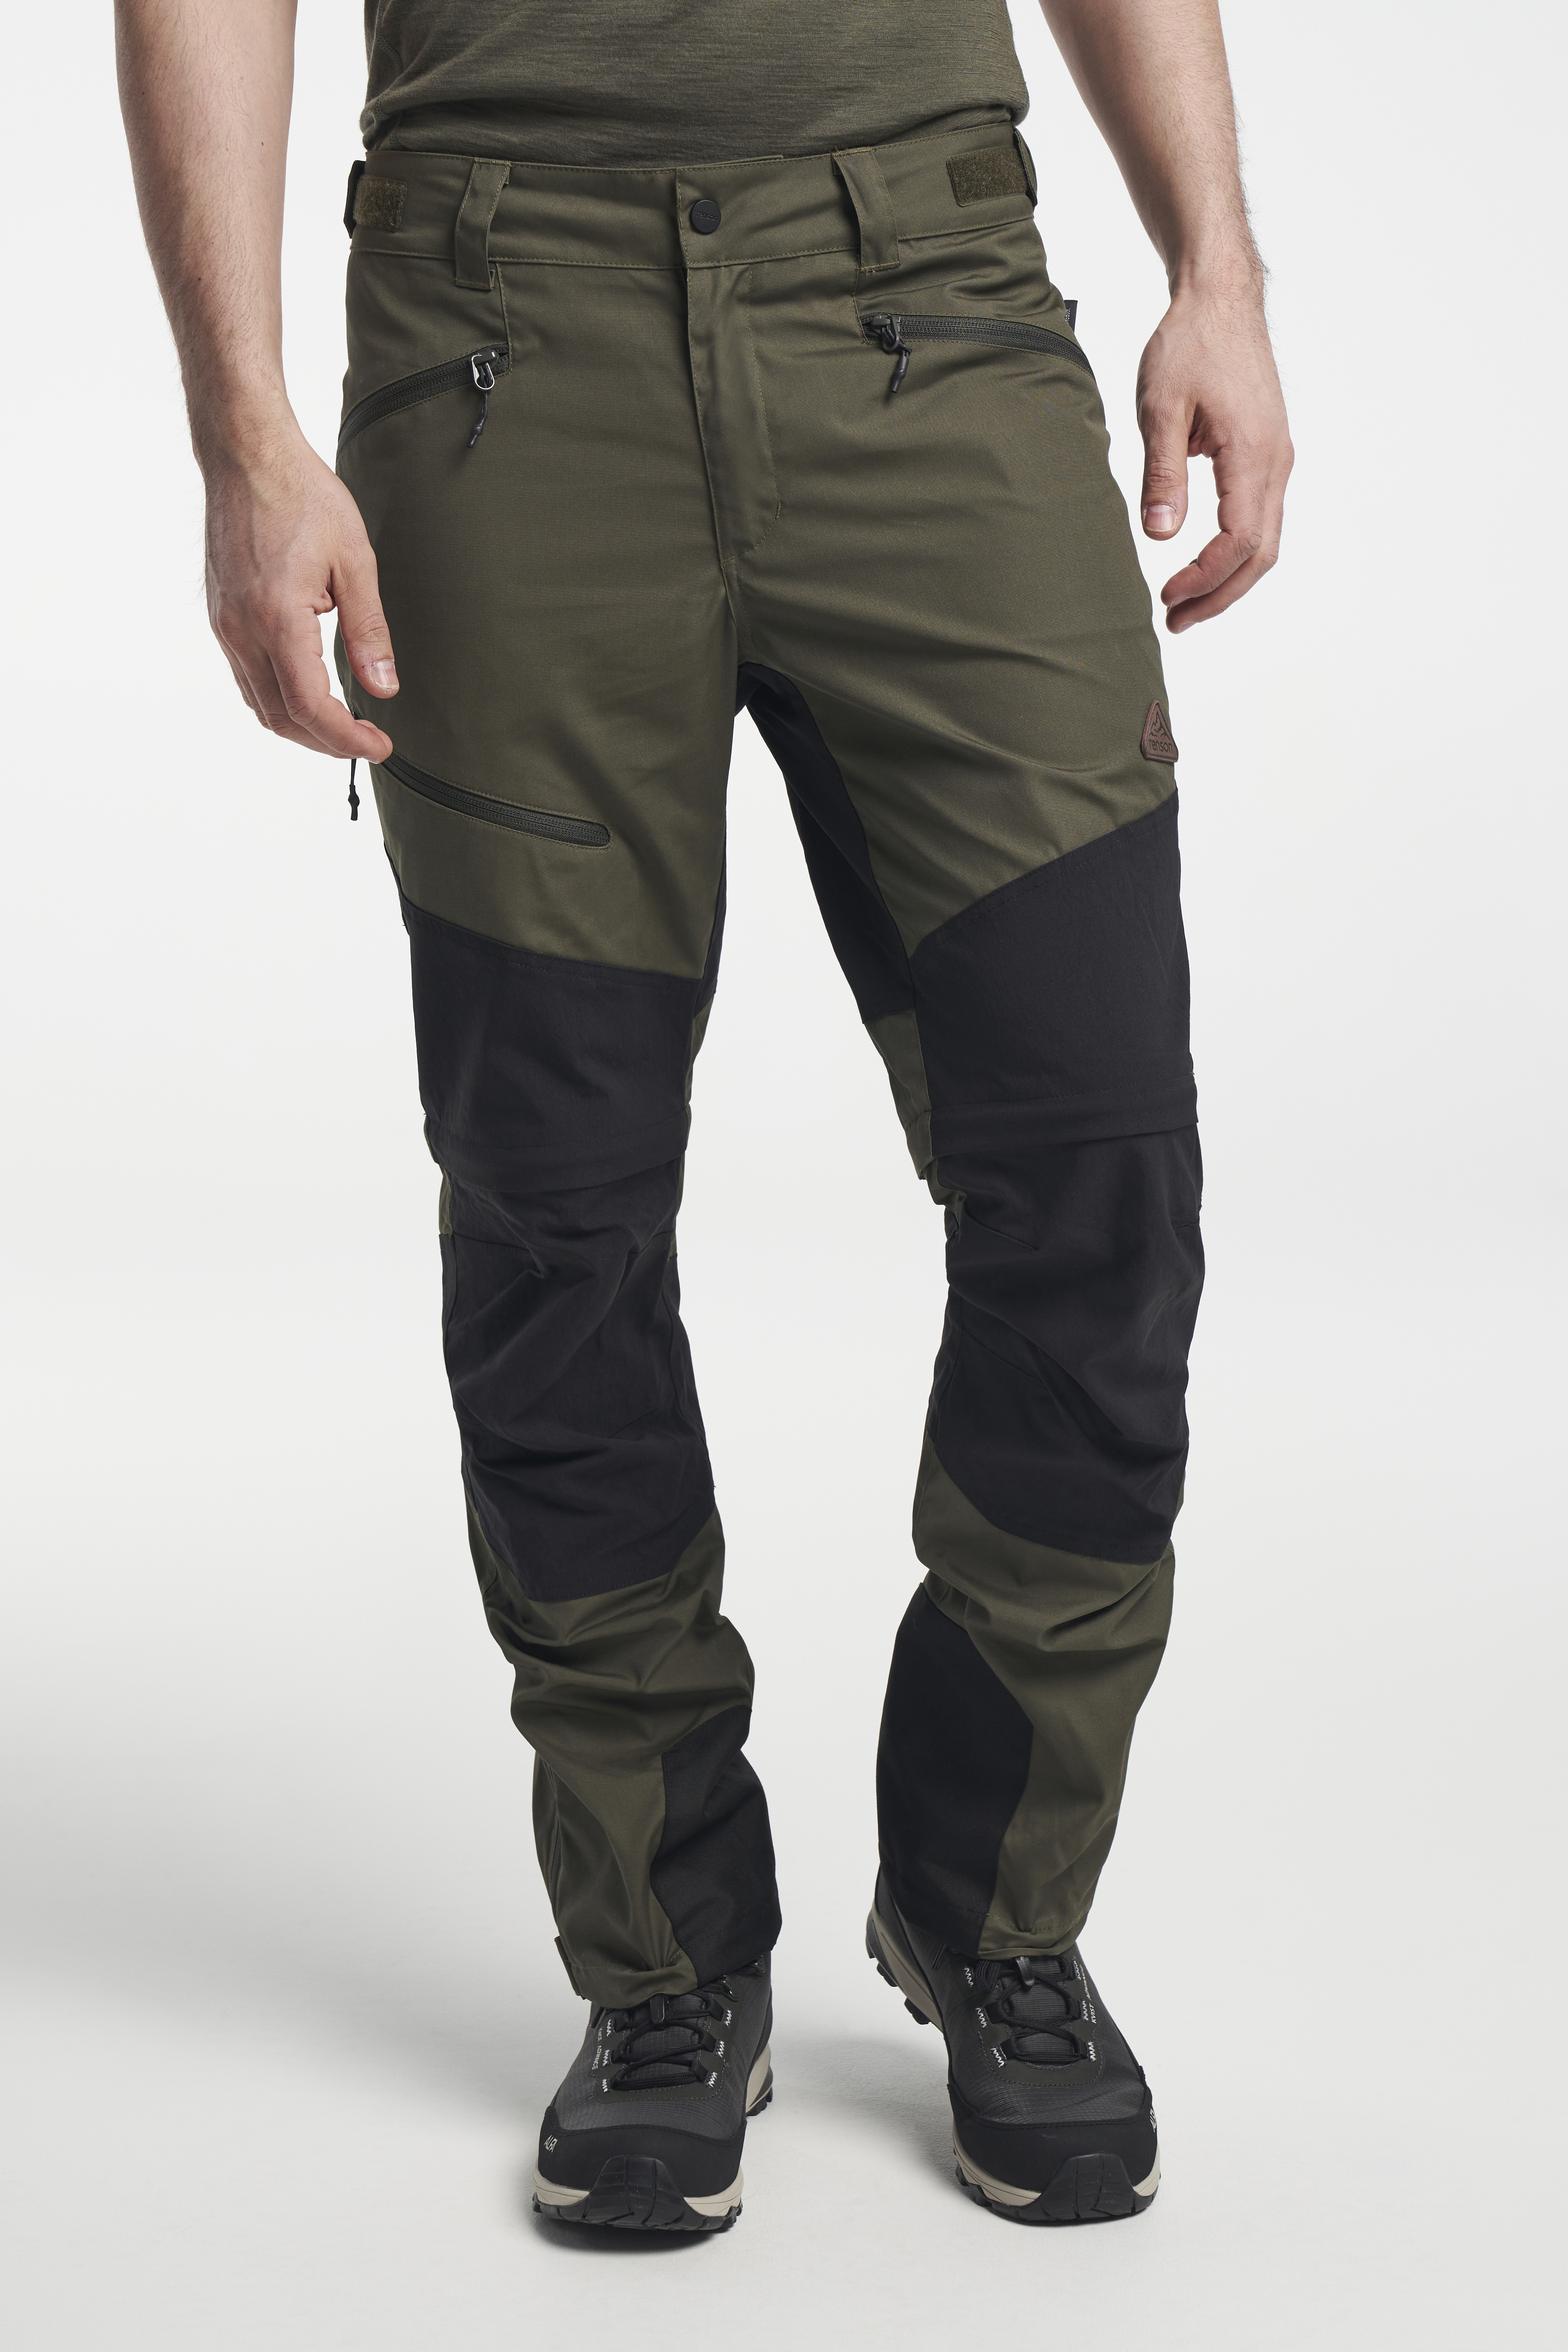 Esdy Men's Sports Quick-Drying Hiking Pants Outdoor Cycling Army Trousers -  China Quick Dry Trousers and Tactical Trousers price | Made-in-China.com